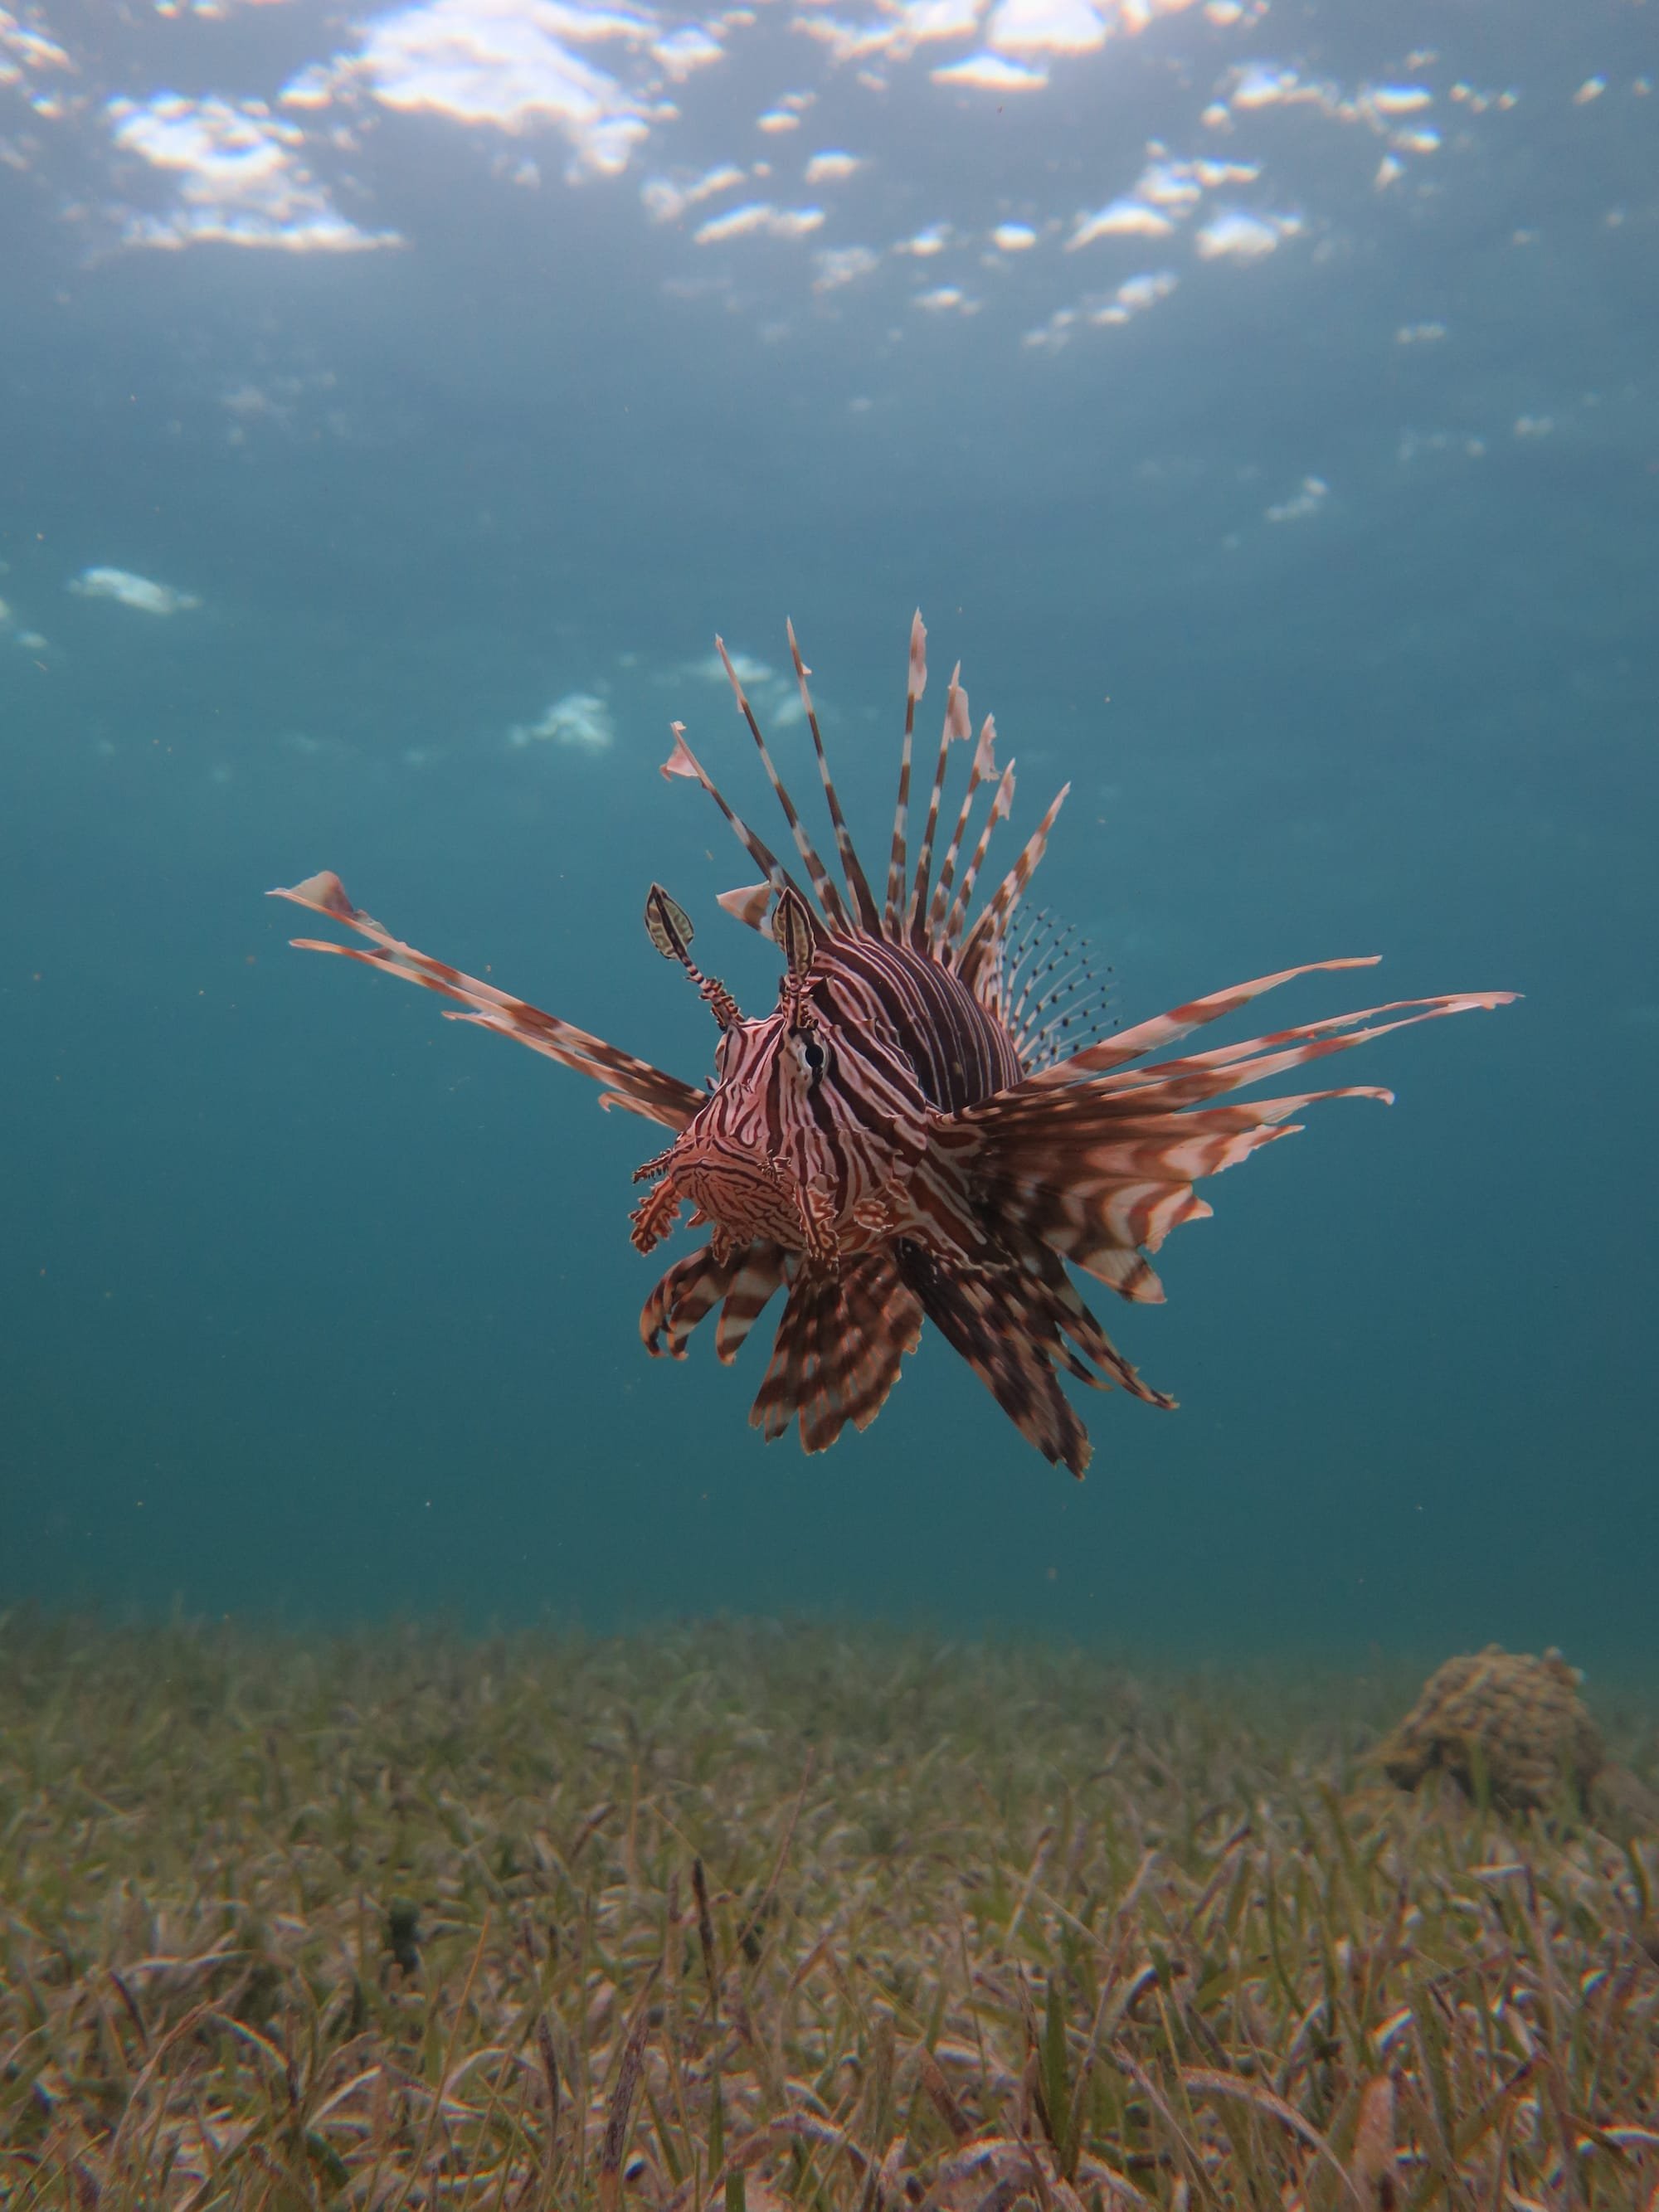 How fear of being eaten might help keep invasive lionfish from taking over reefs